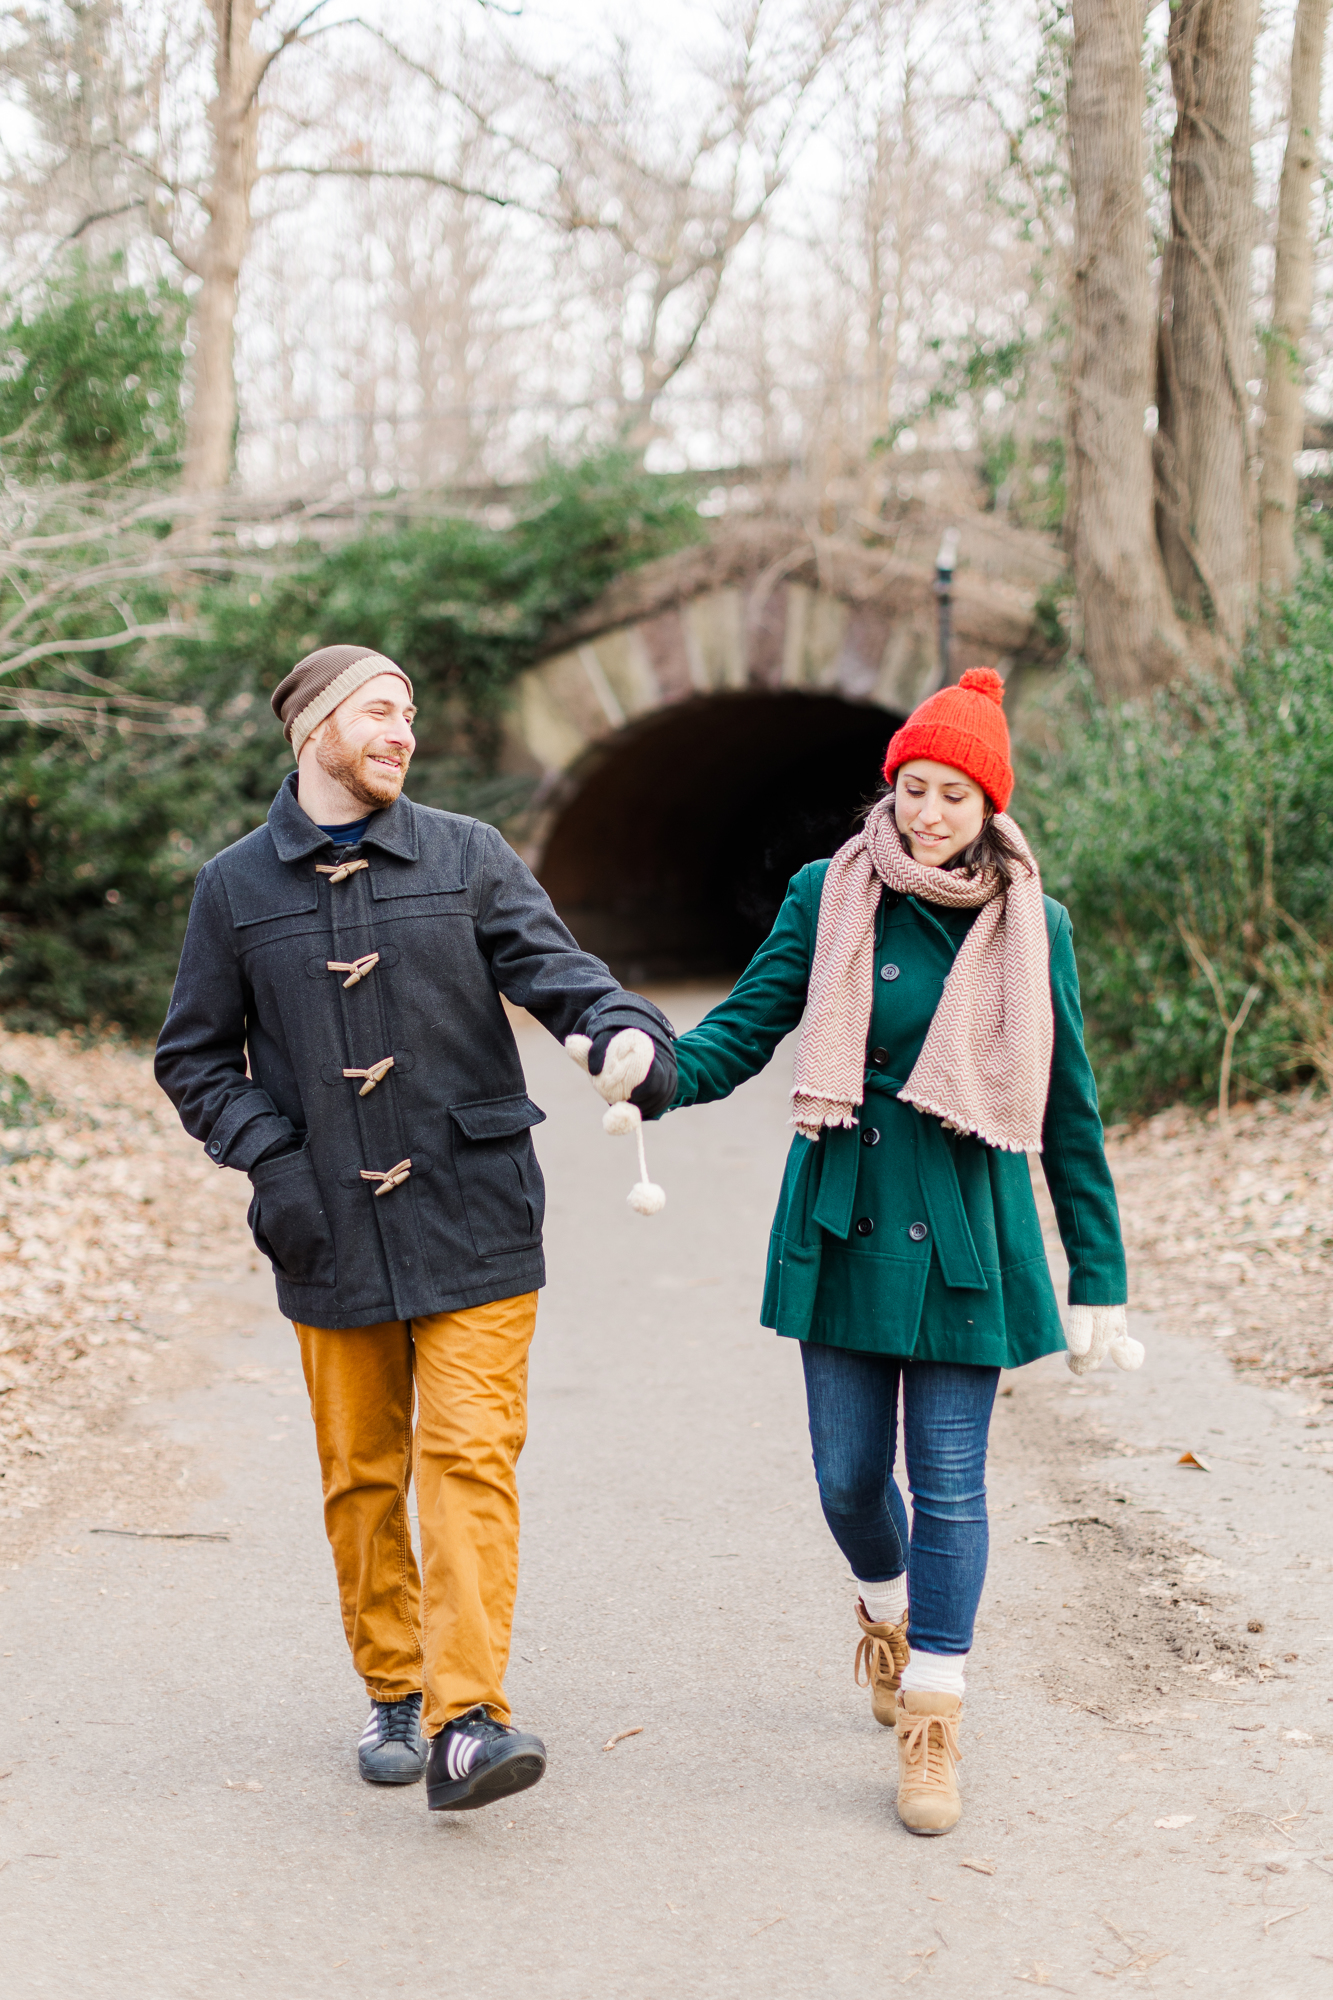 Magical and Vibrant Winter Engagement Photos in Prospect Park